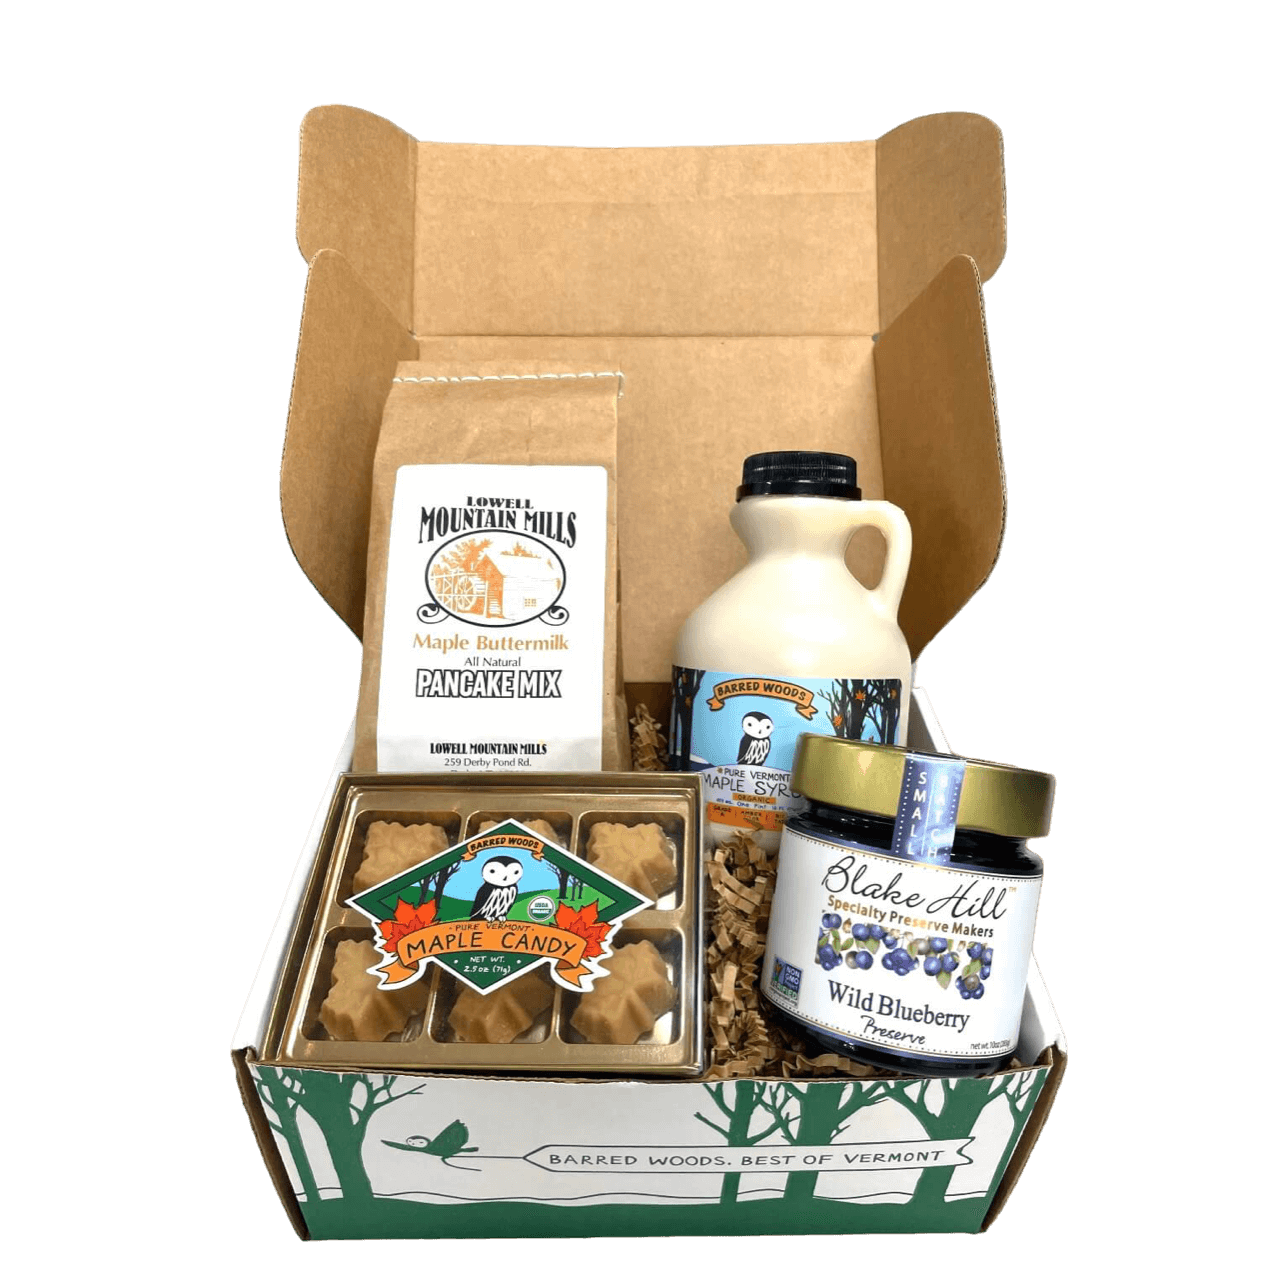 Blake Hill corporate gift boxes, many options of preserves and jams 